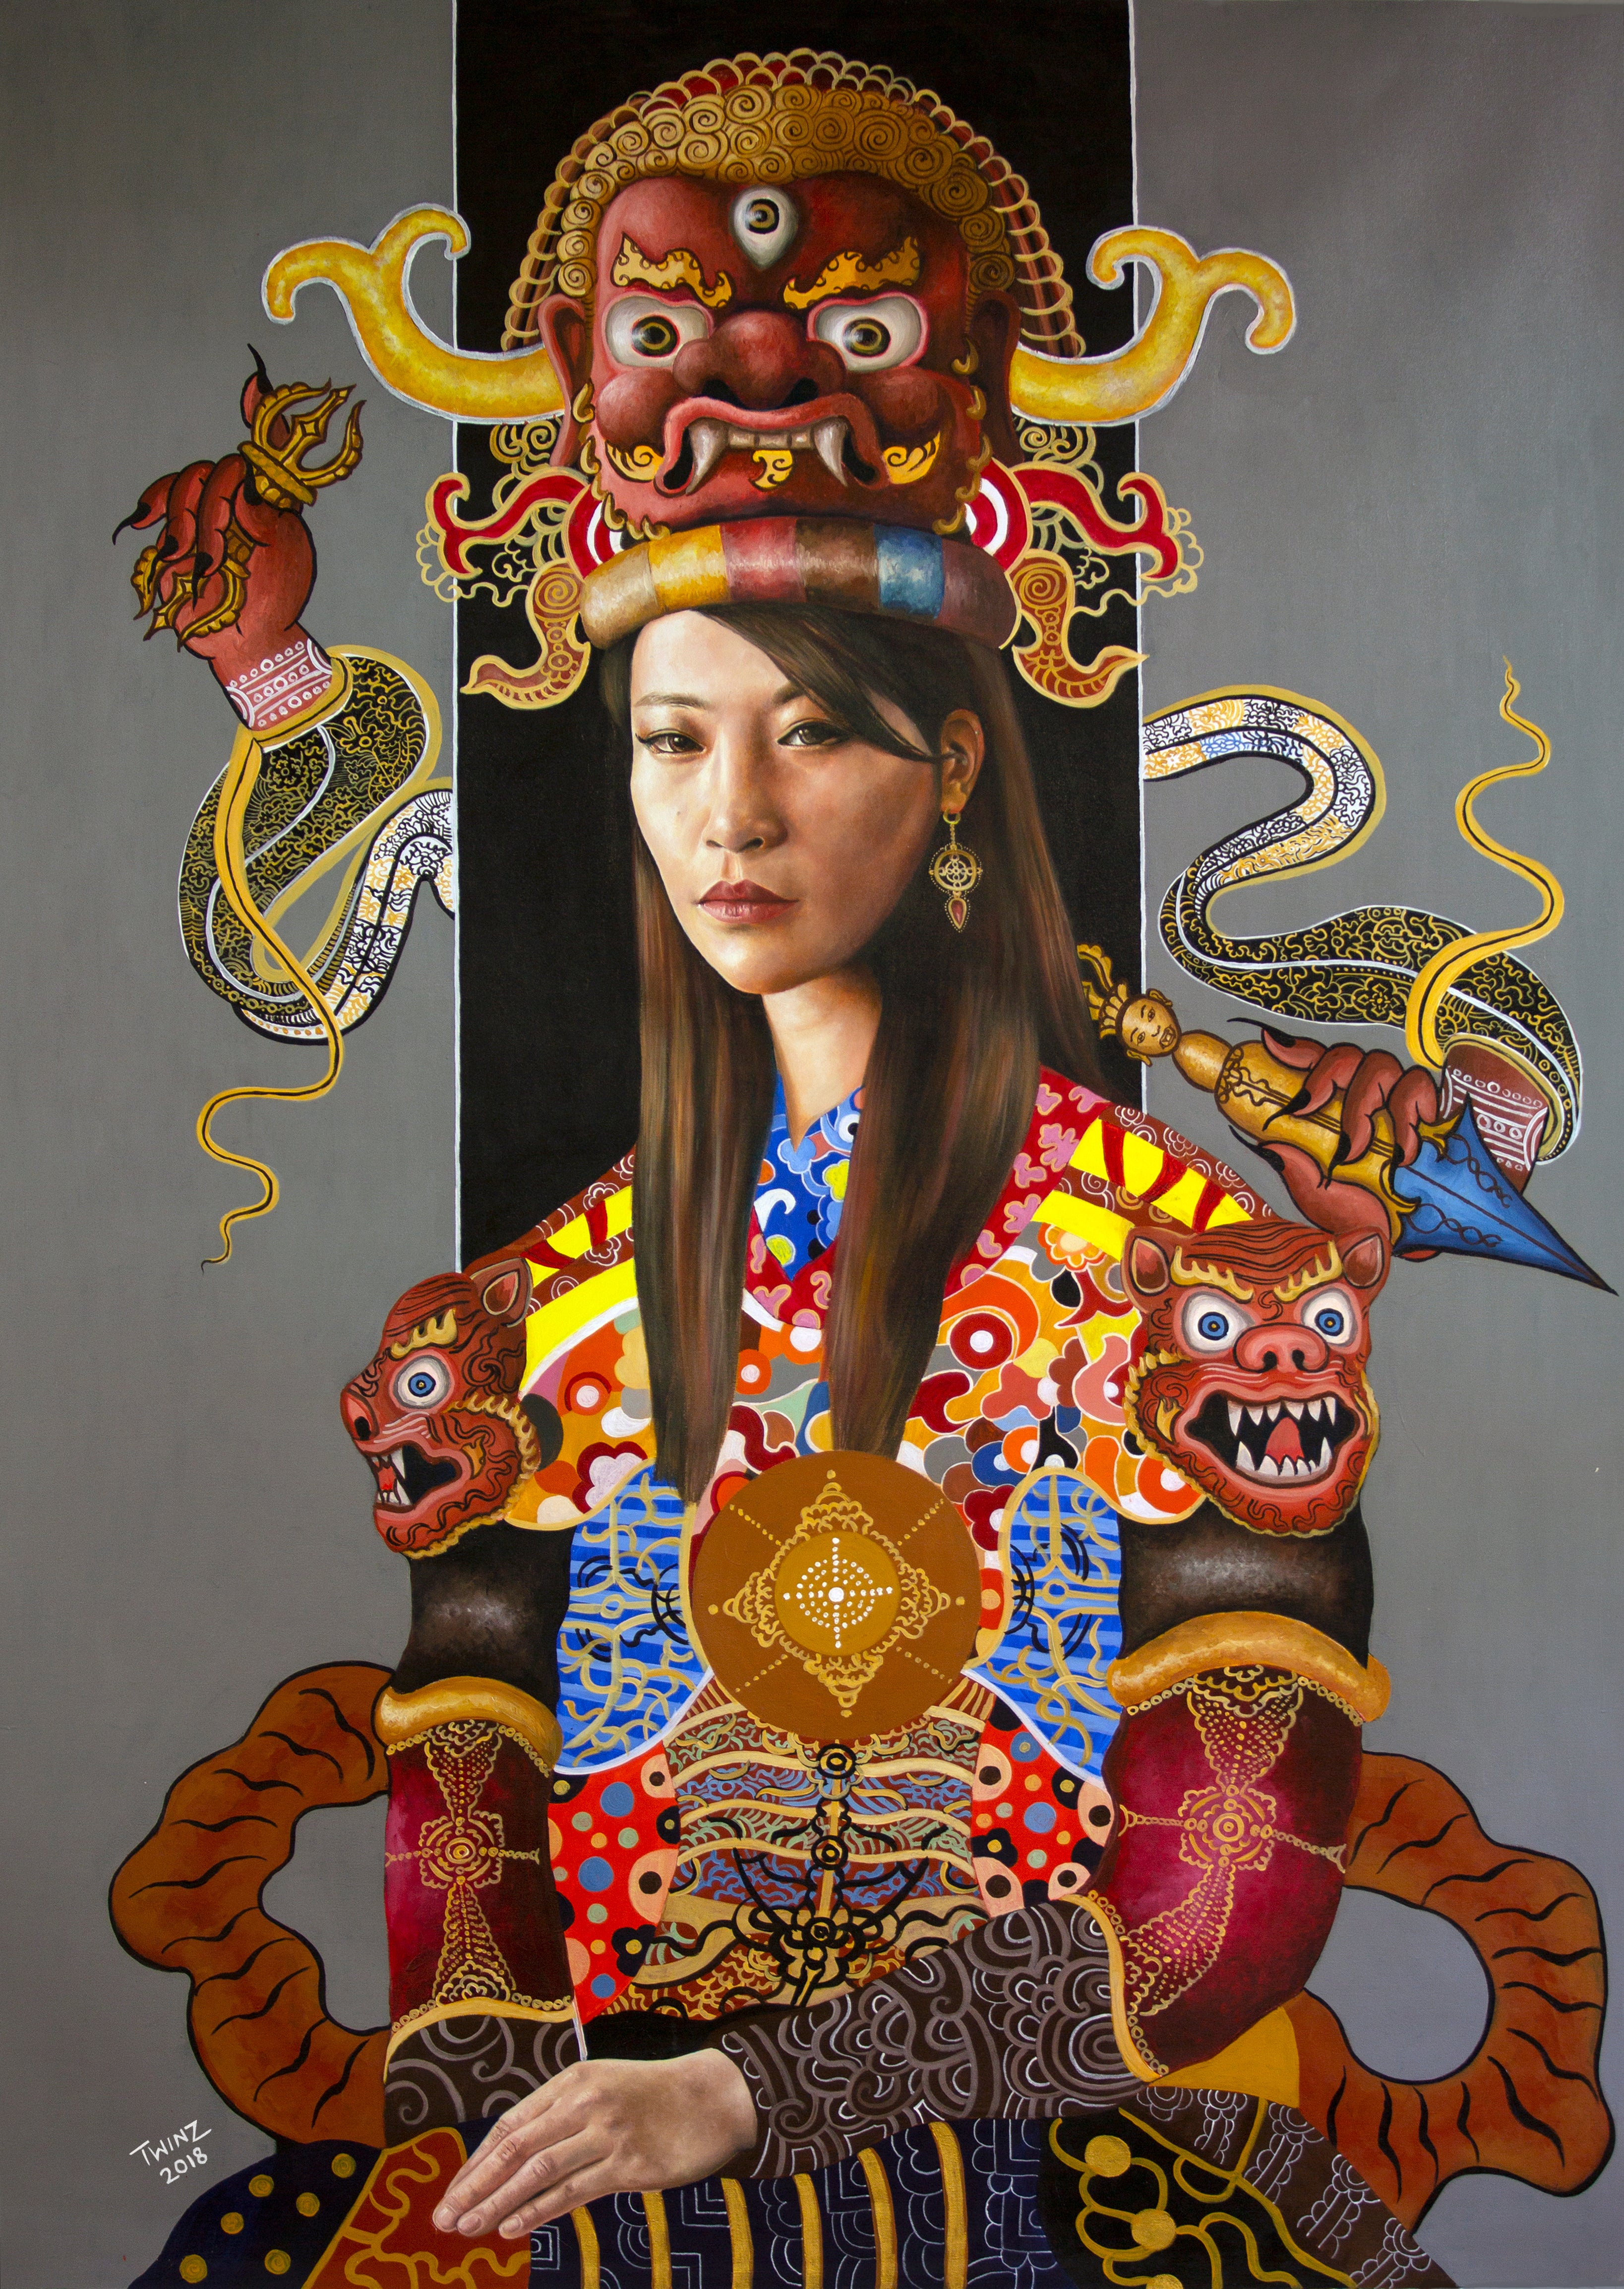 'THE GUARDIAN OF THE TRANSCENDENT WORLD' - Contemporary Bhutanese Painting - InspiredByBhutan